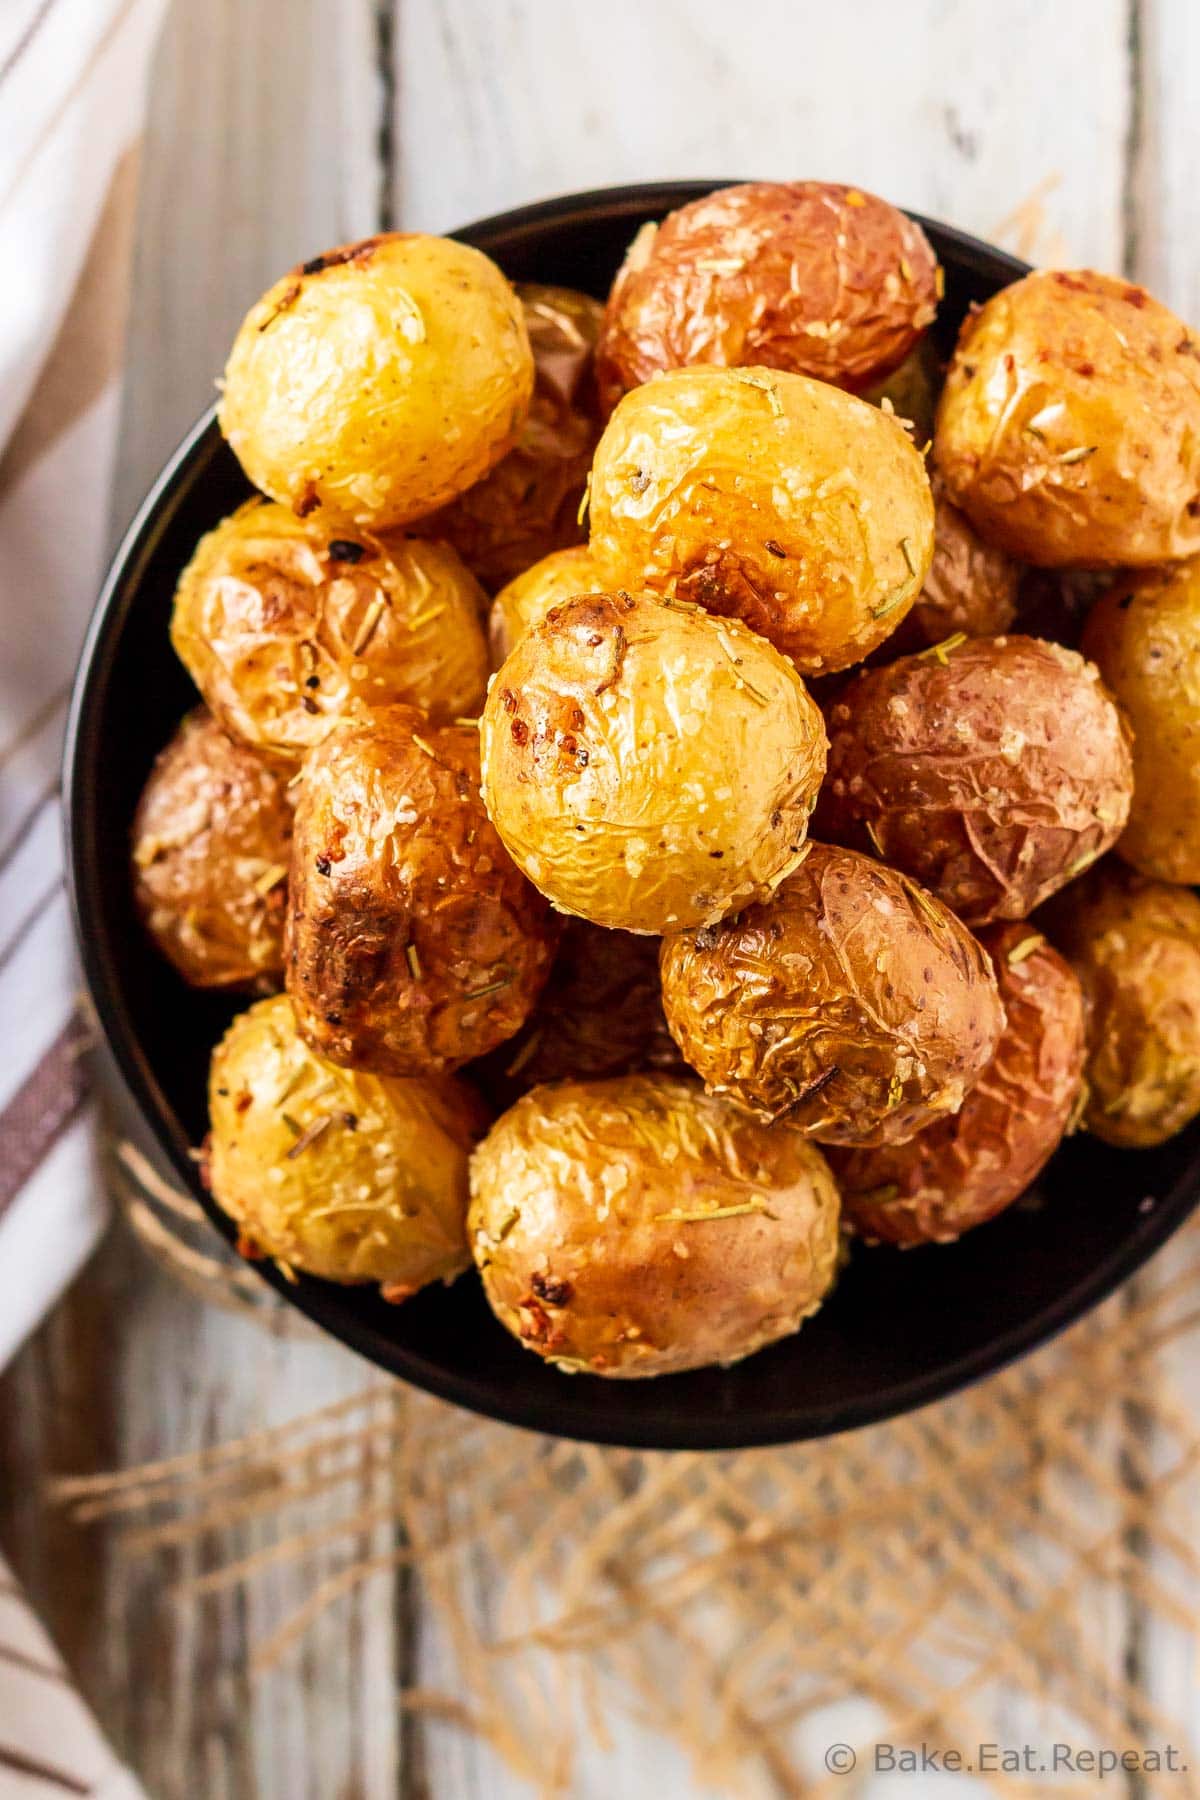 Roasted Baby Potatoes with Rosemary and Garlic - Bake. Eat. Repeat.